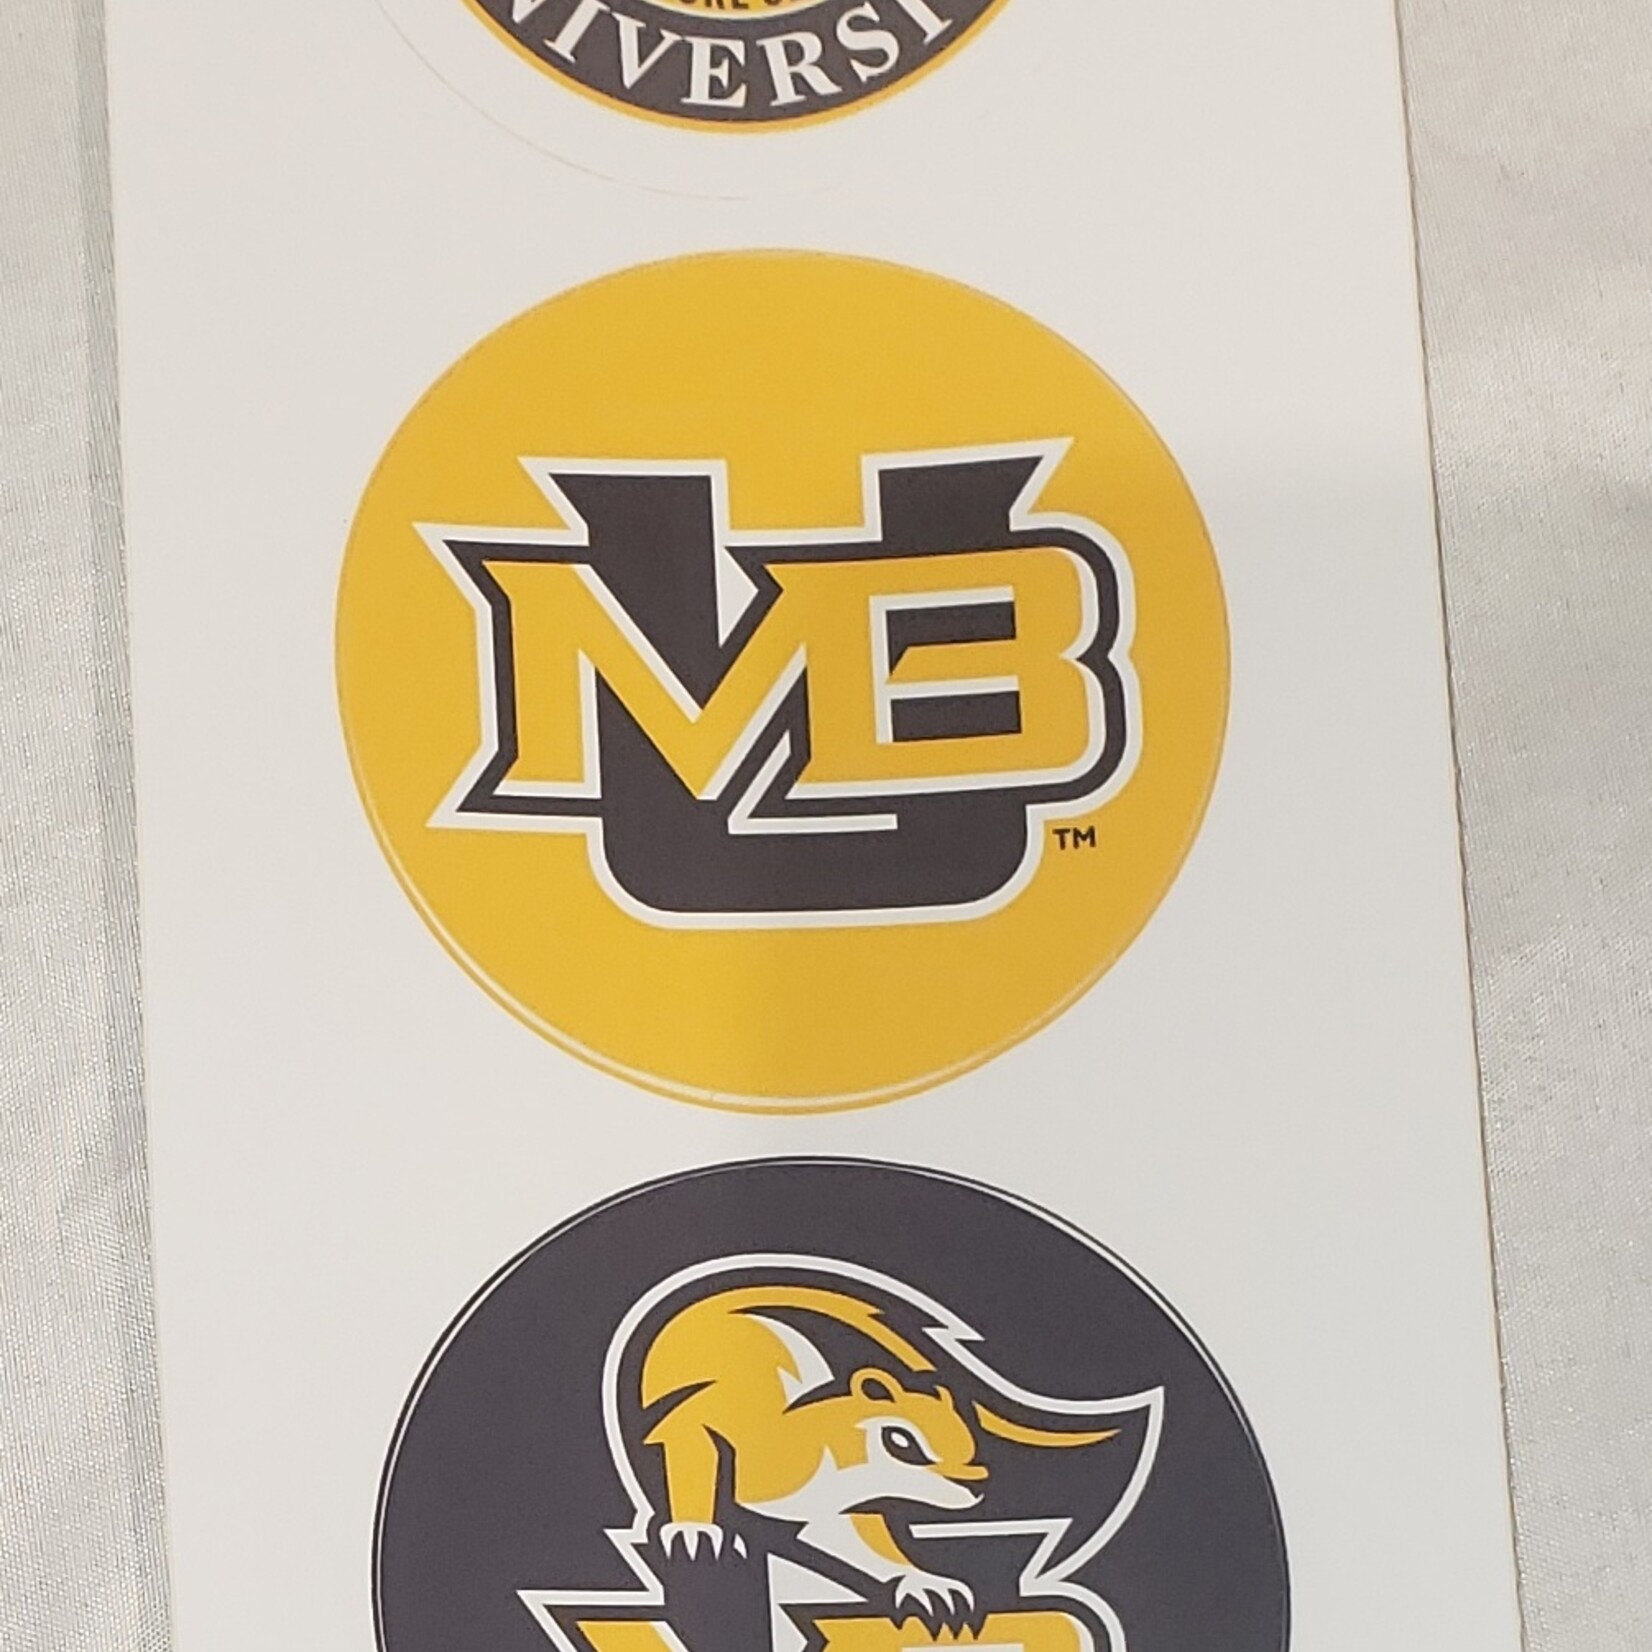 Spirit Products Mary Baldwin Decals  (set of 3 )